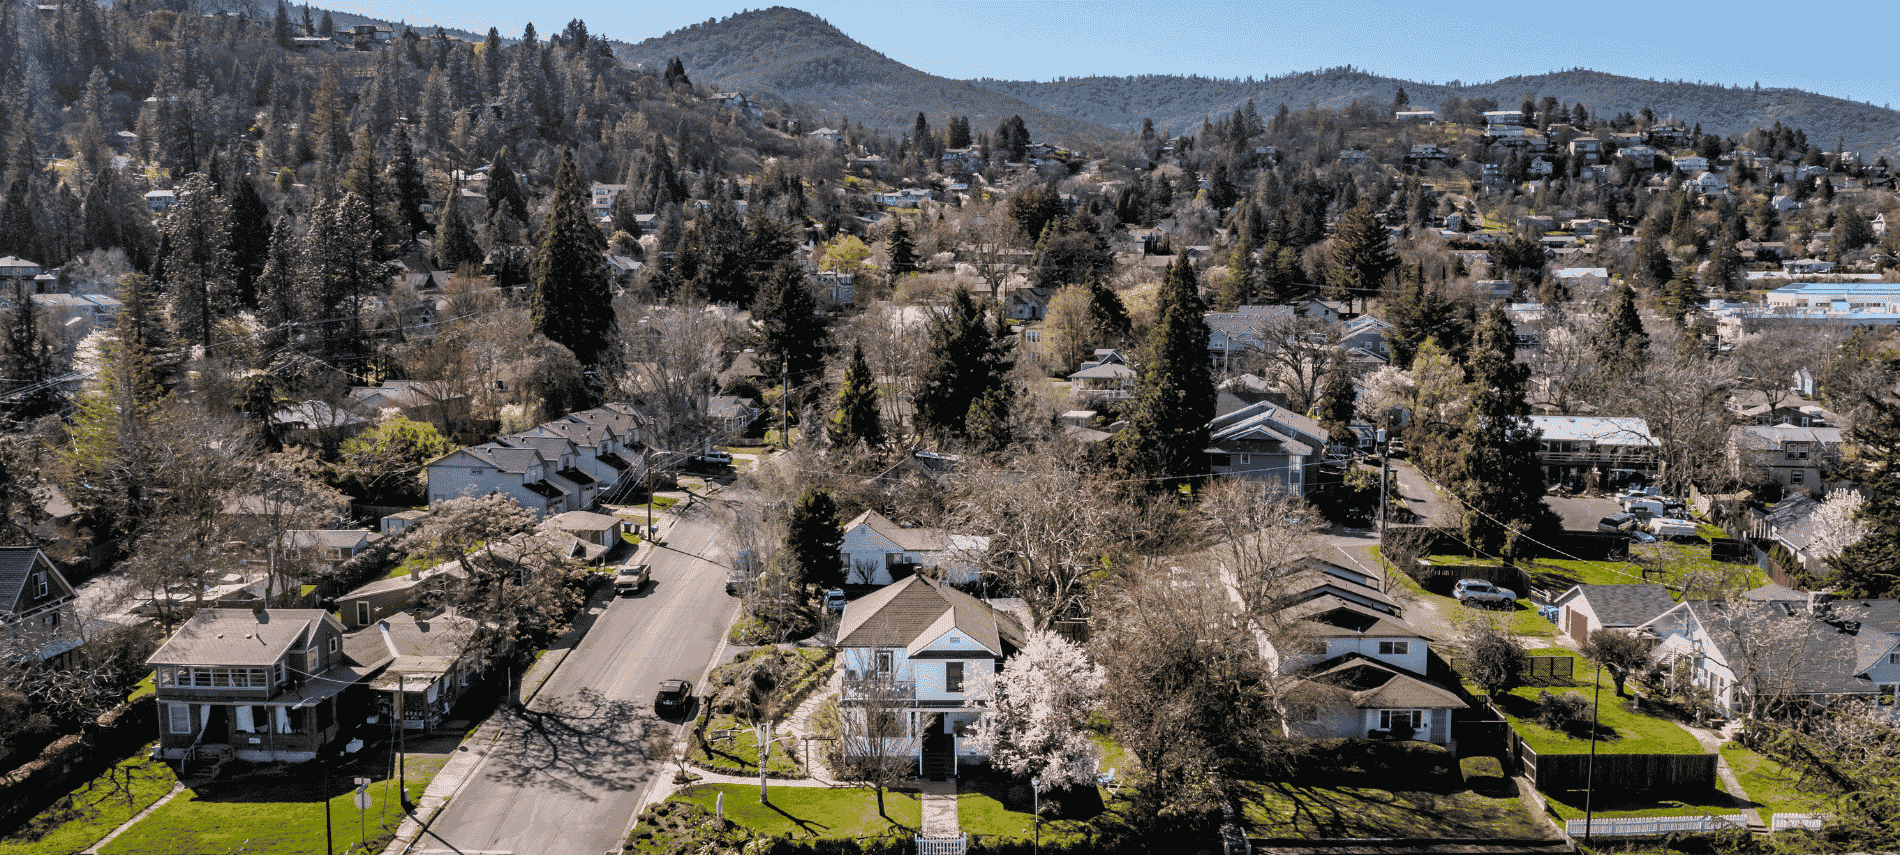 Ashland surrounded by the local houses and mountains